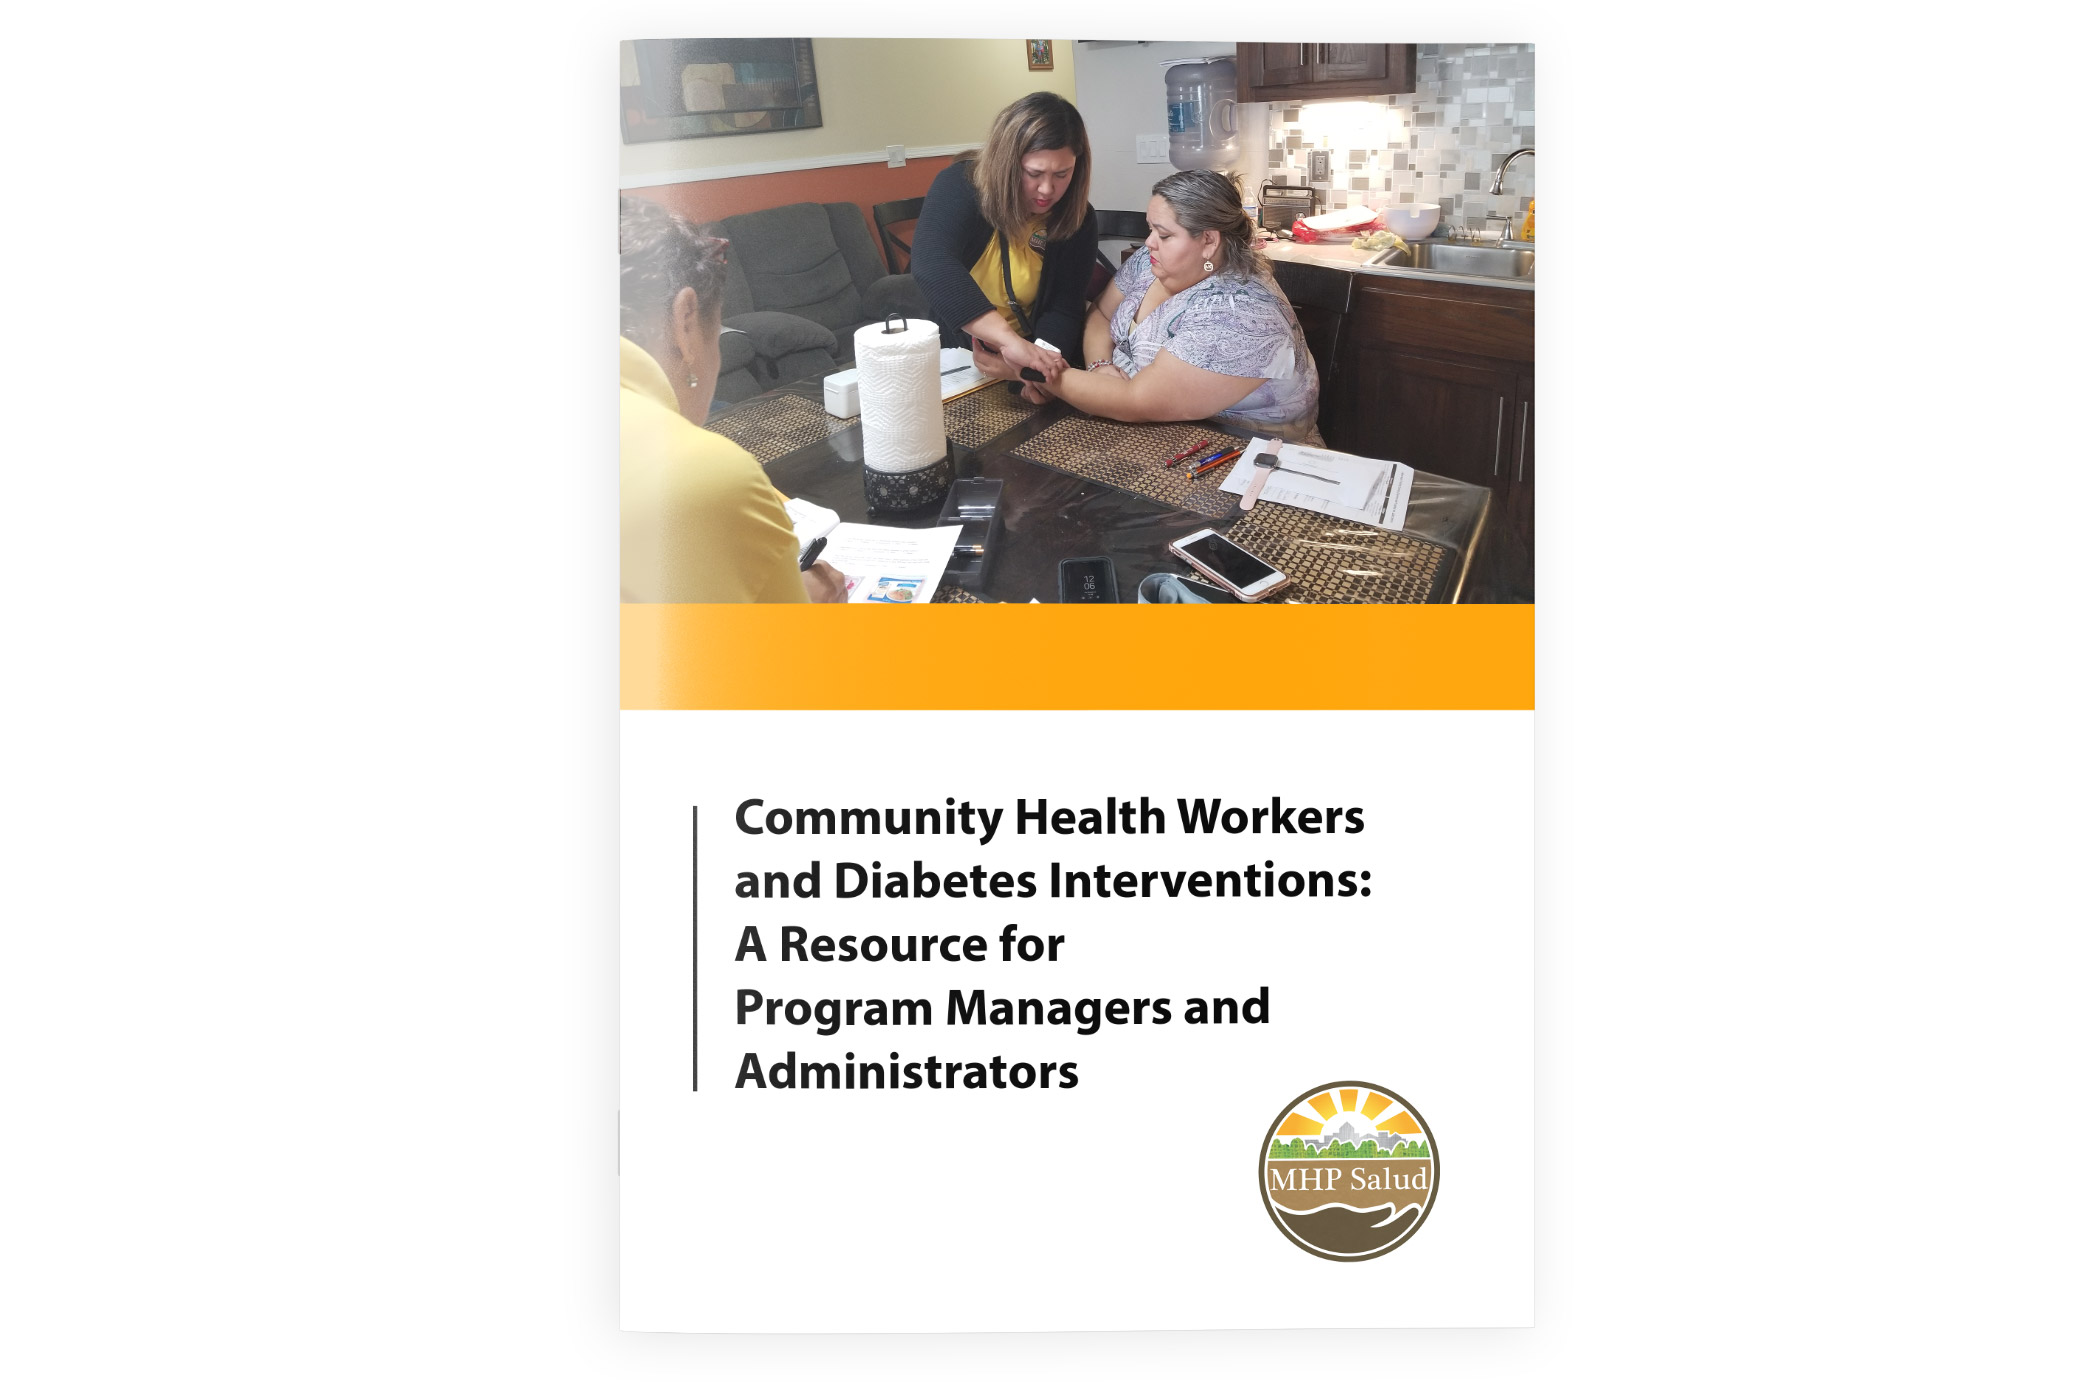 Community Health Workers and Diabetes Interventions: A Resource for Program Managers and Administrators